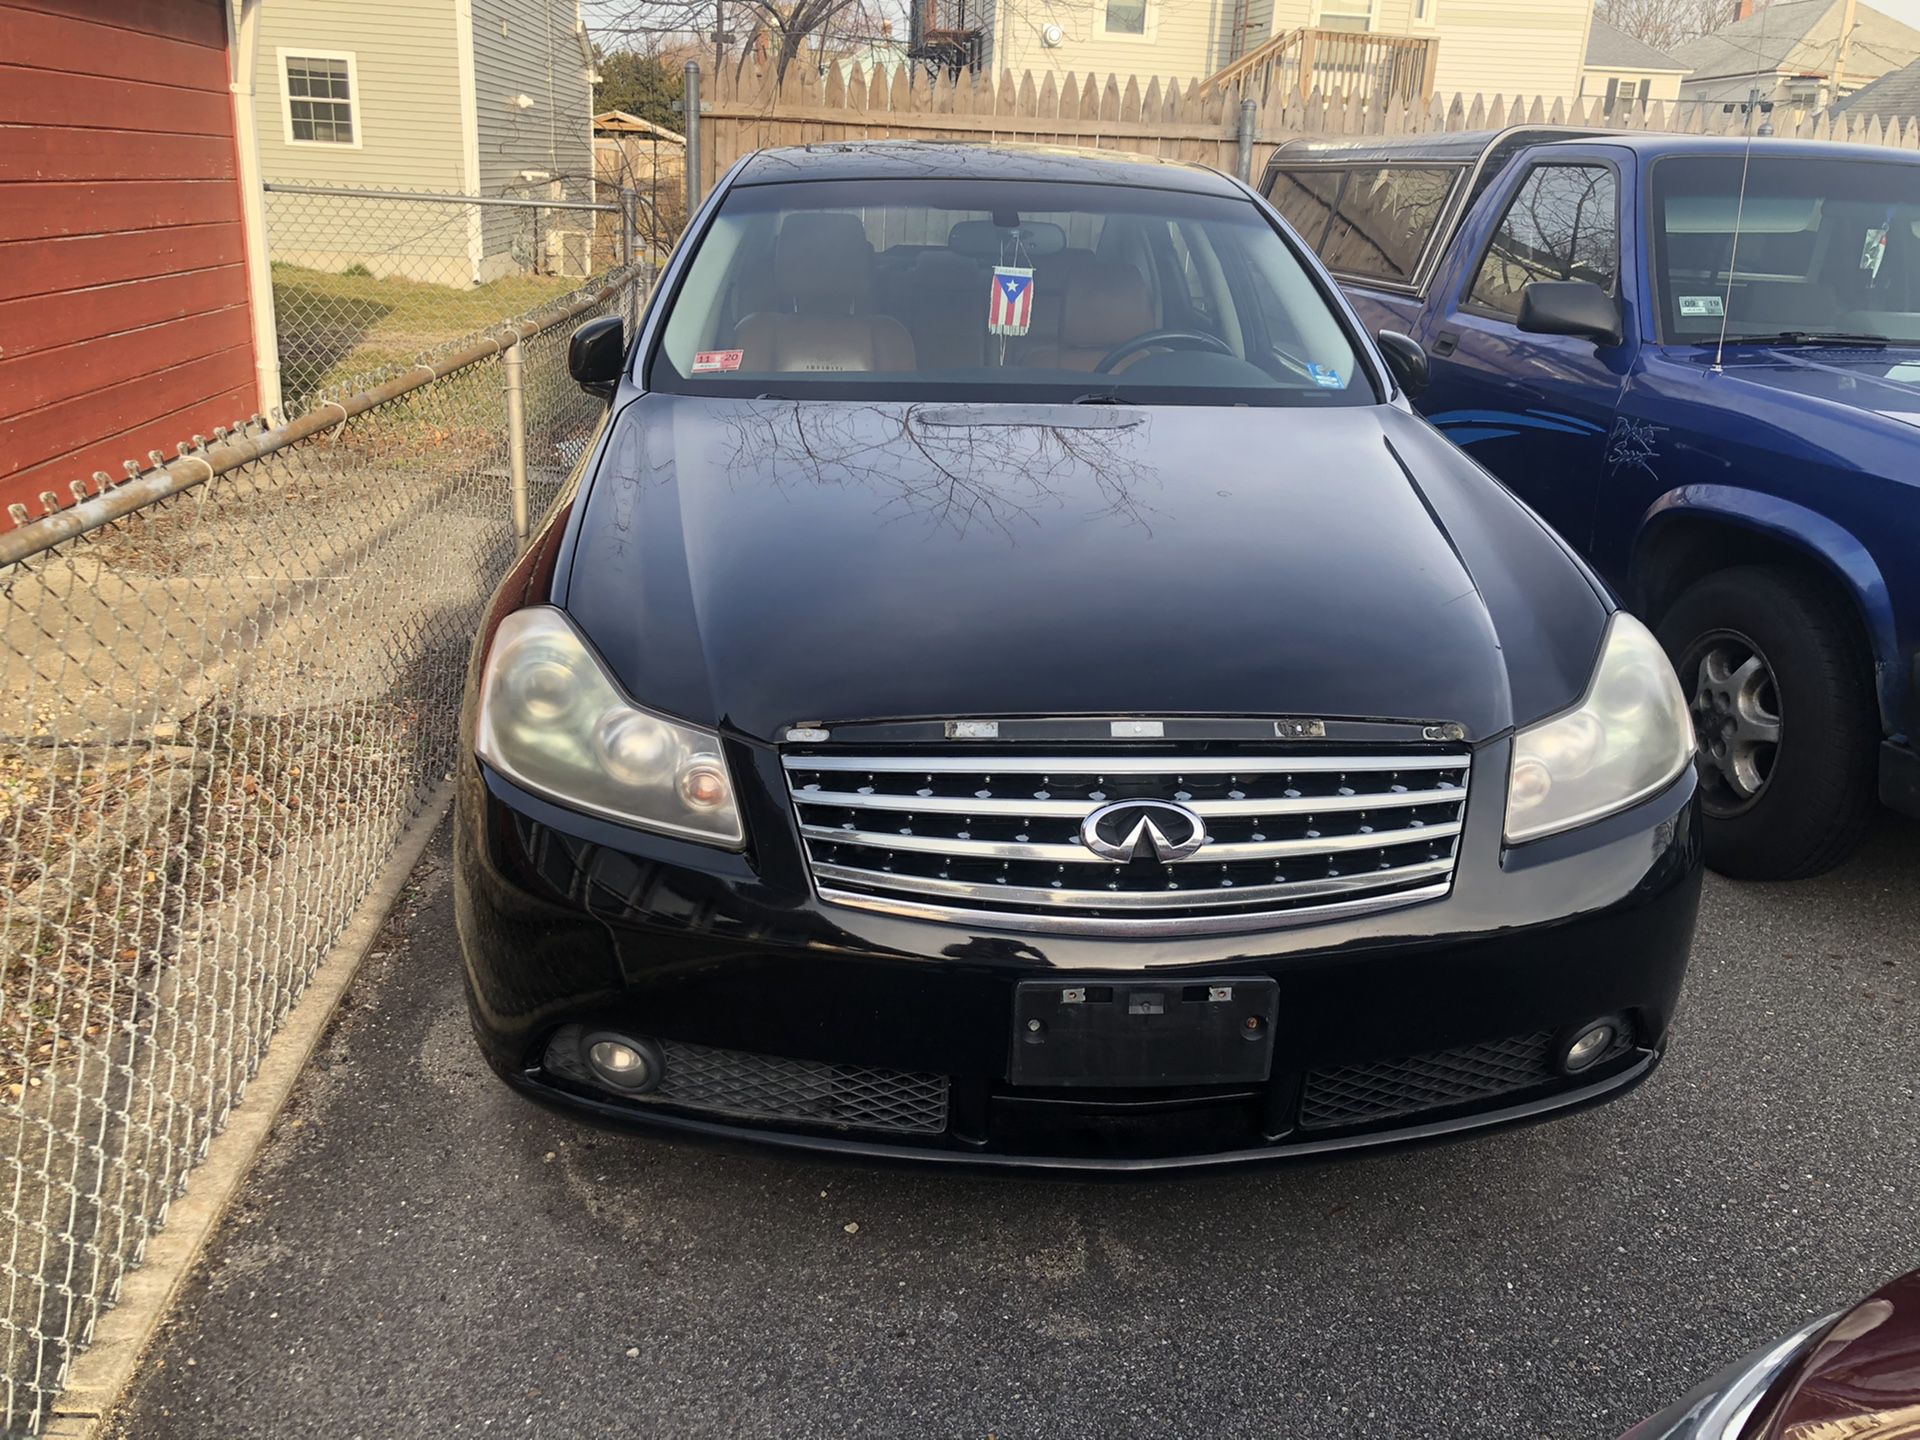 06 Infiniti m35x for parts